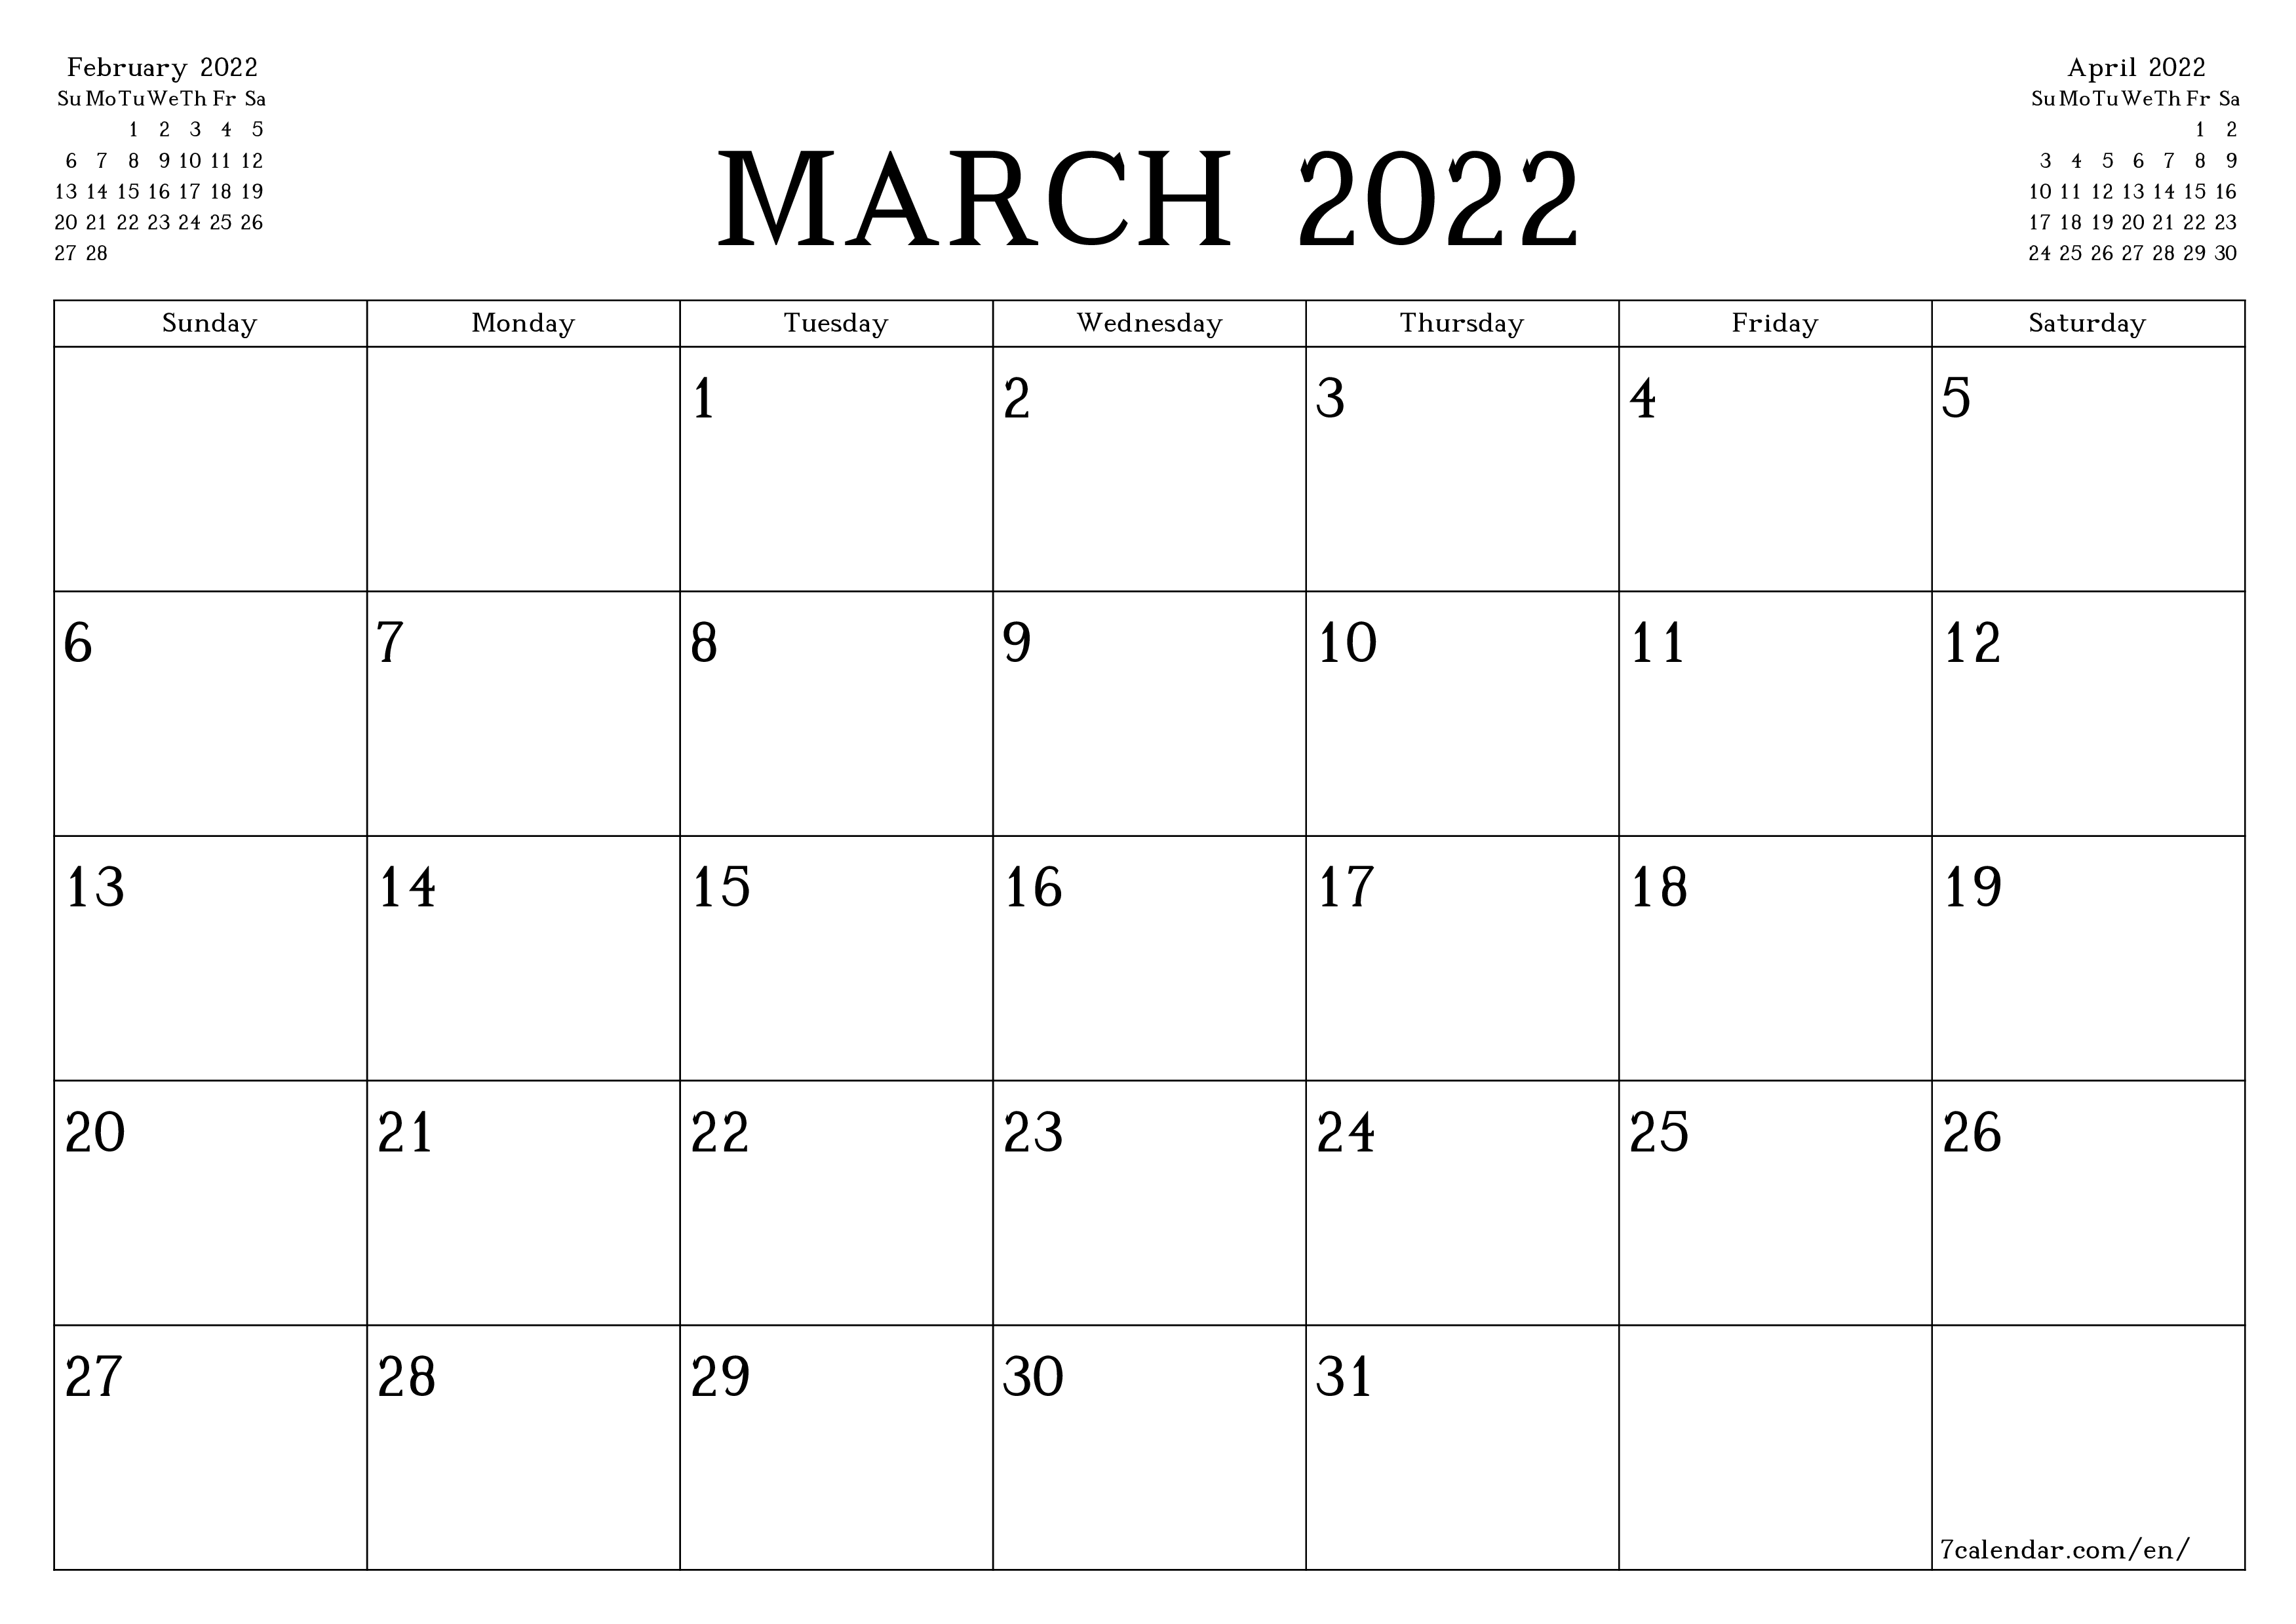 March Calendar For 2022 March 2022 Free Printable Calendars And Planners, Pdf Templates - 7Calendar